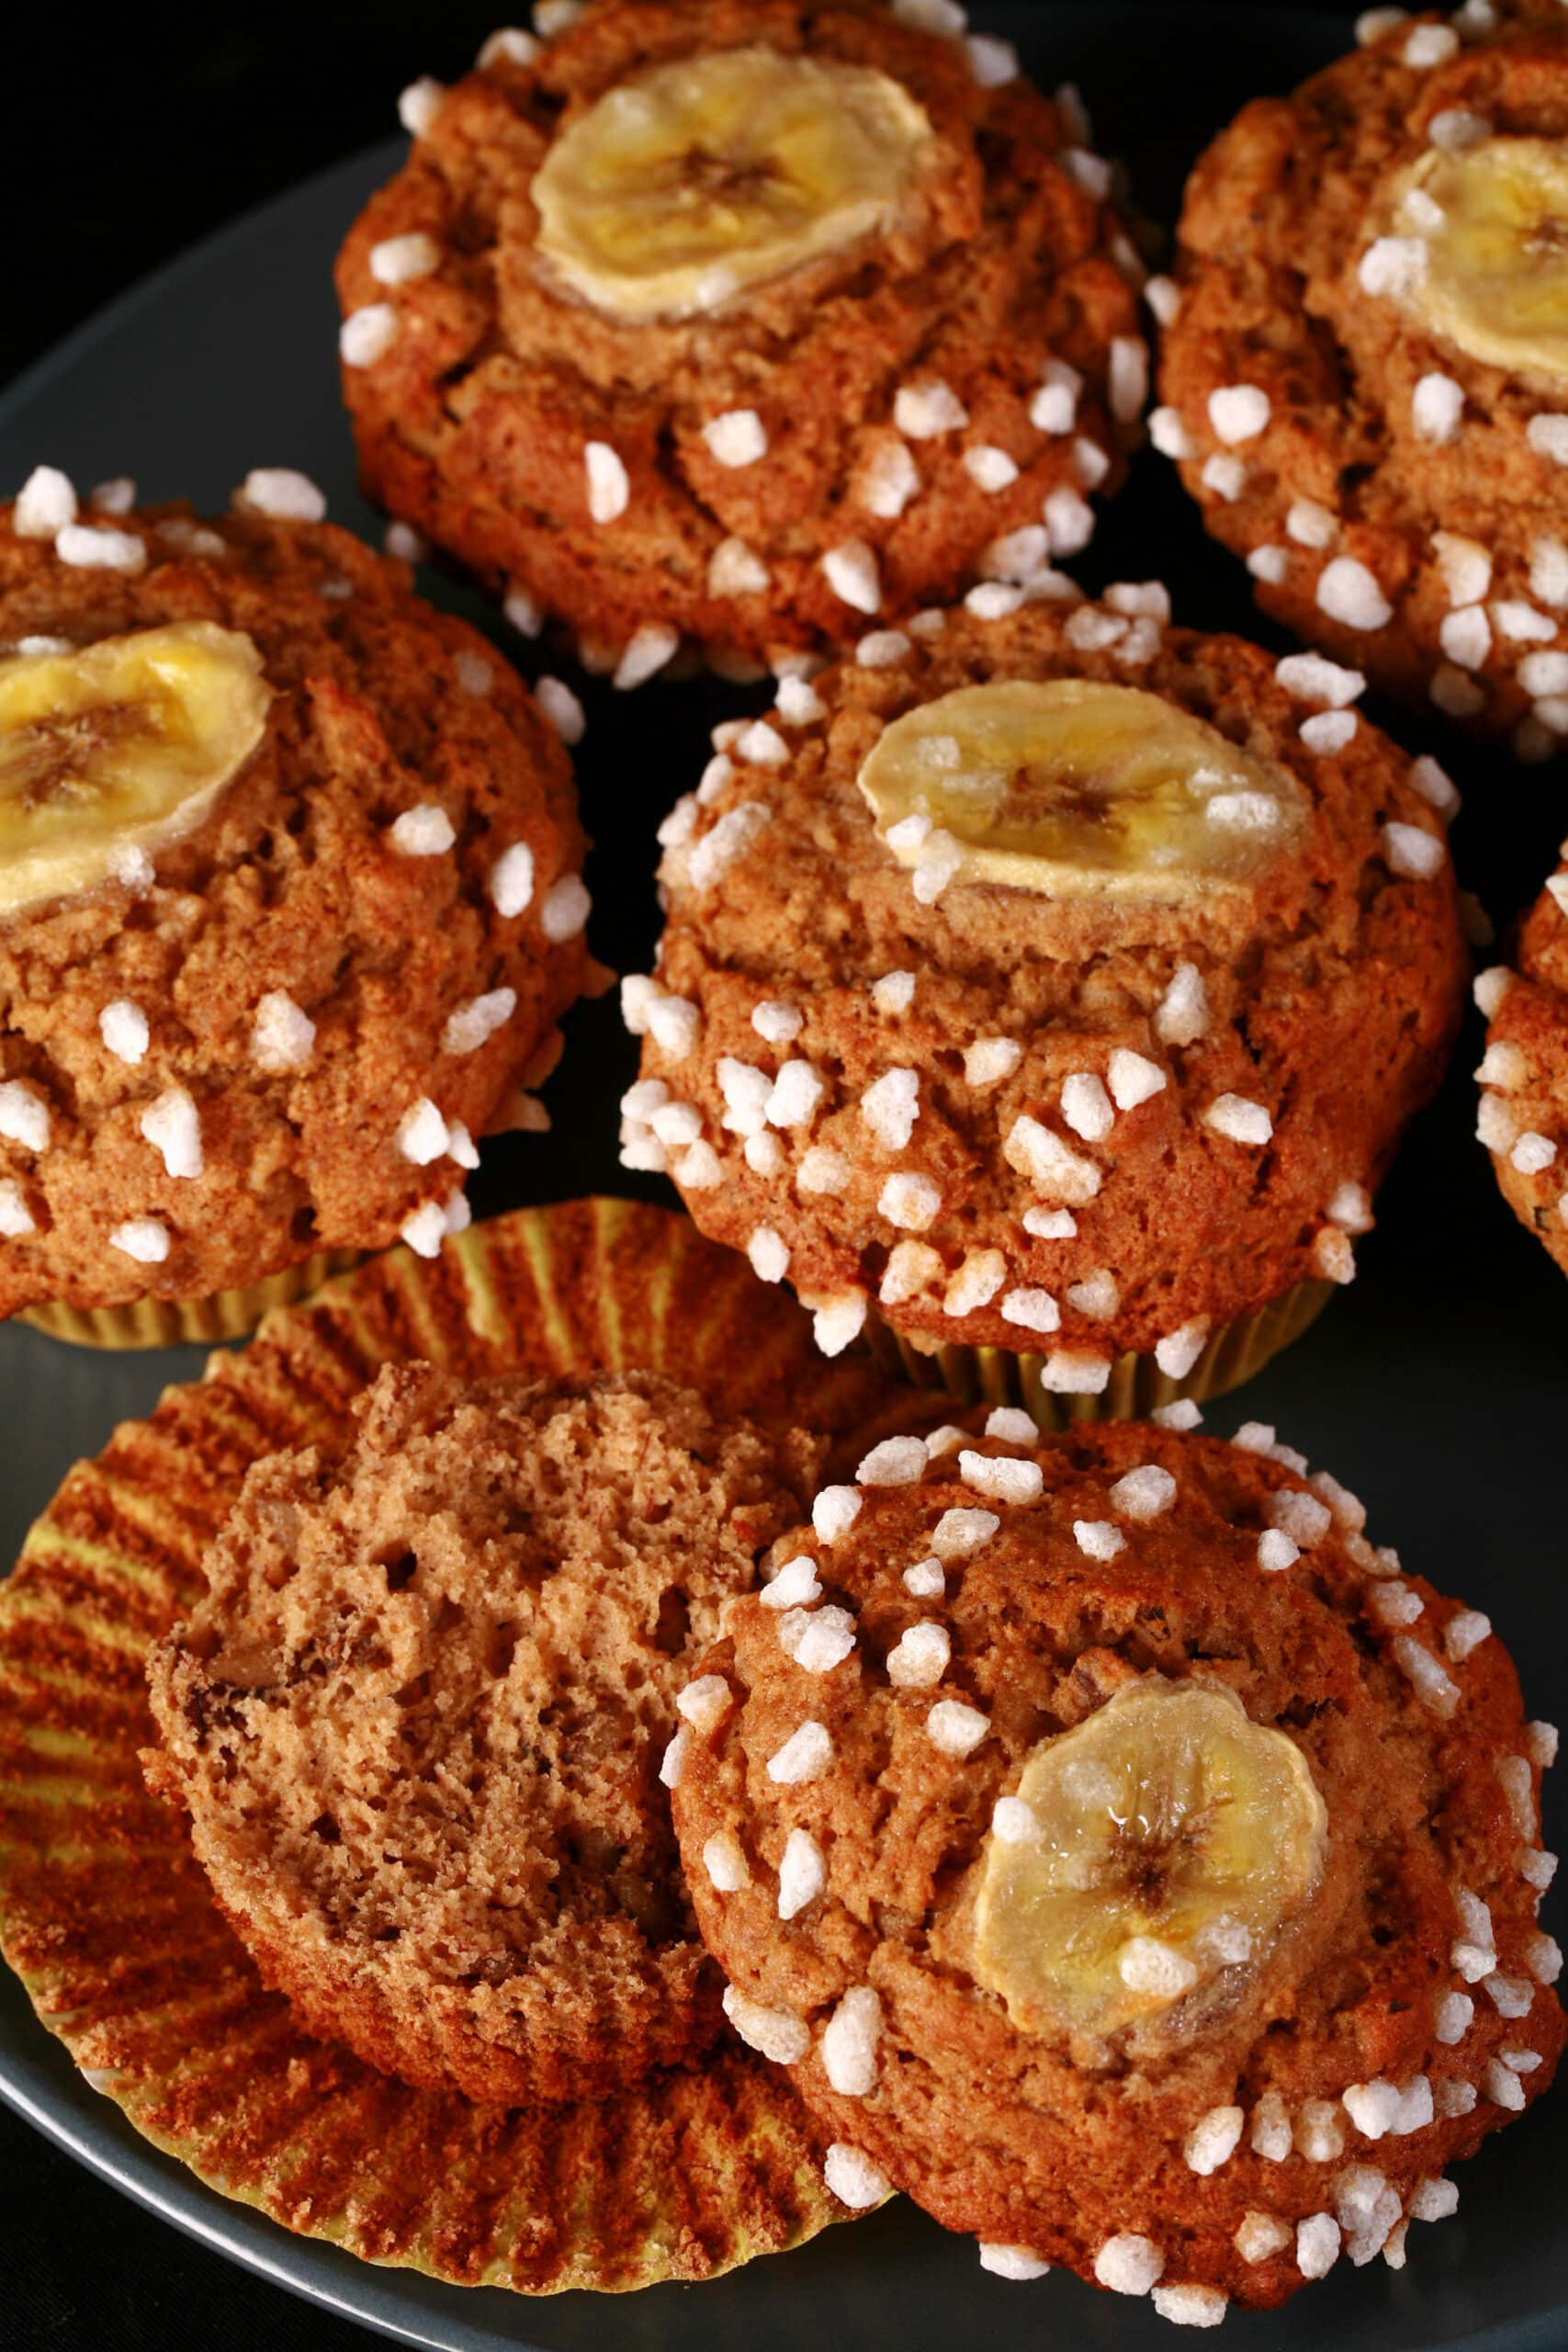 A plate of gluten-free banana muffins, topped with coarse sugar and banana slices.